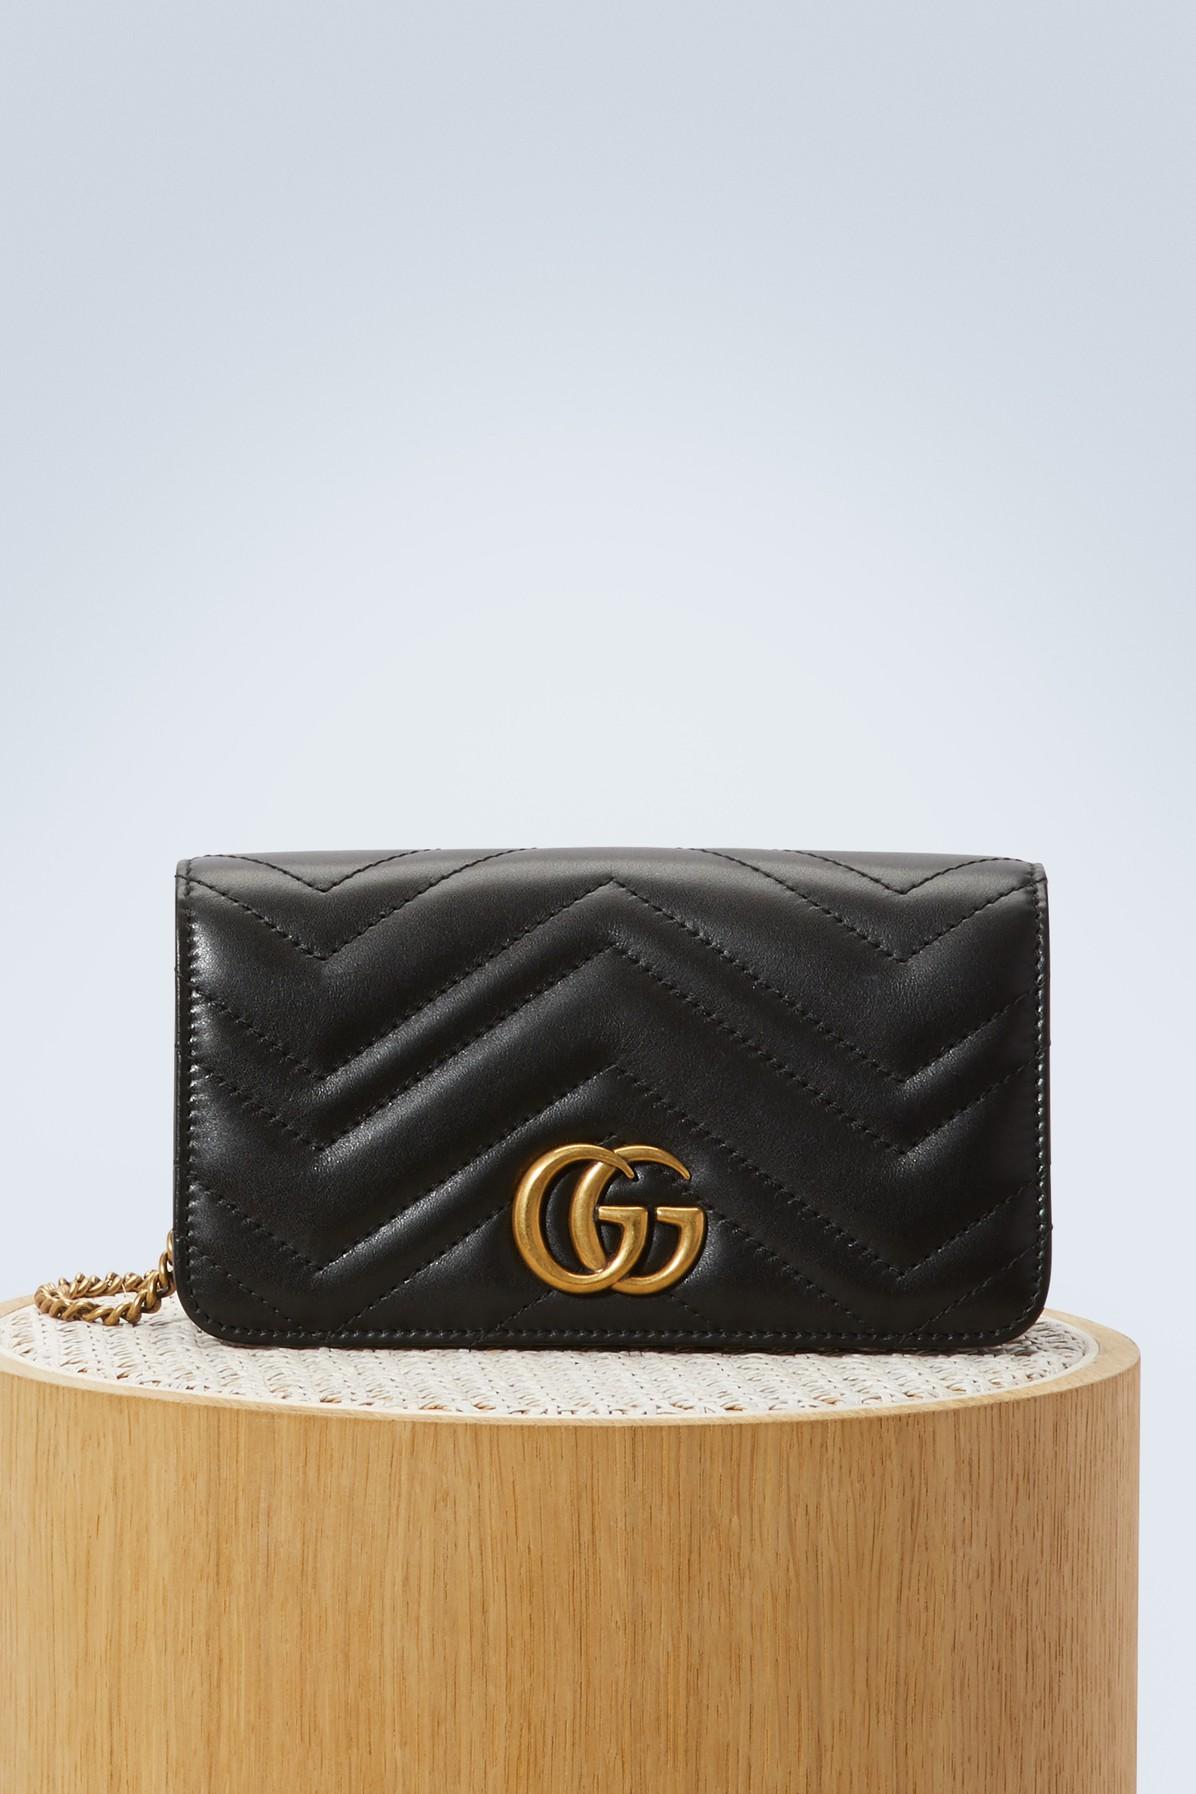 Gucci GG Marmont Wallet On Chain in Black - Lyst